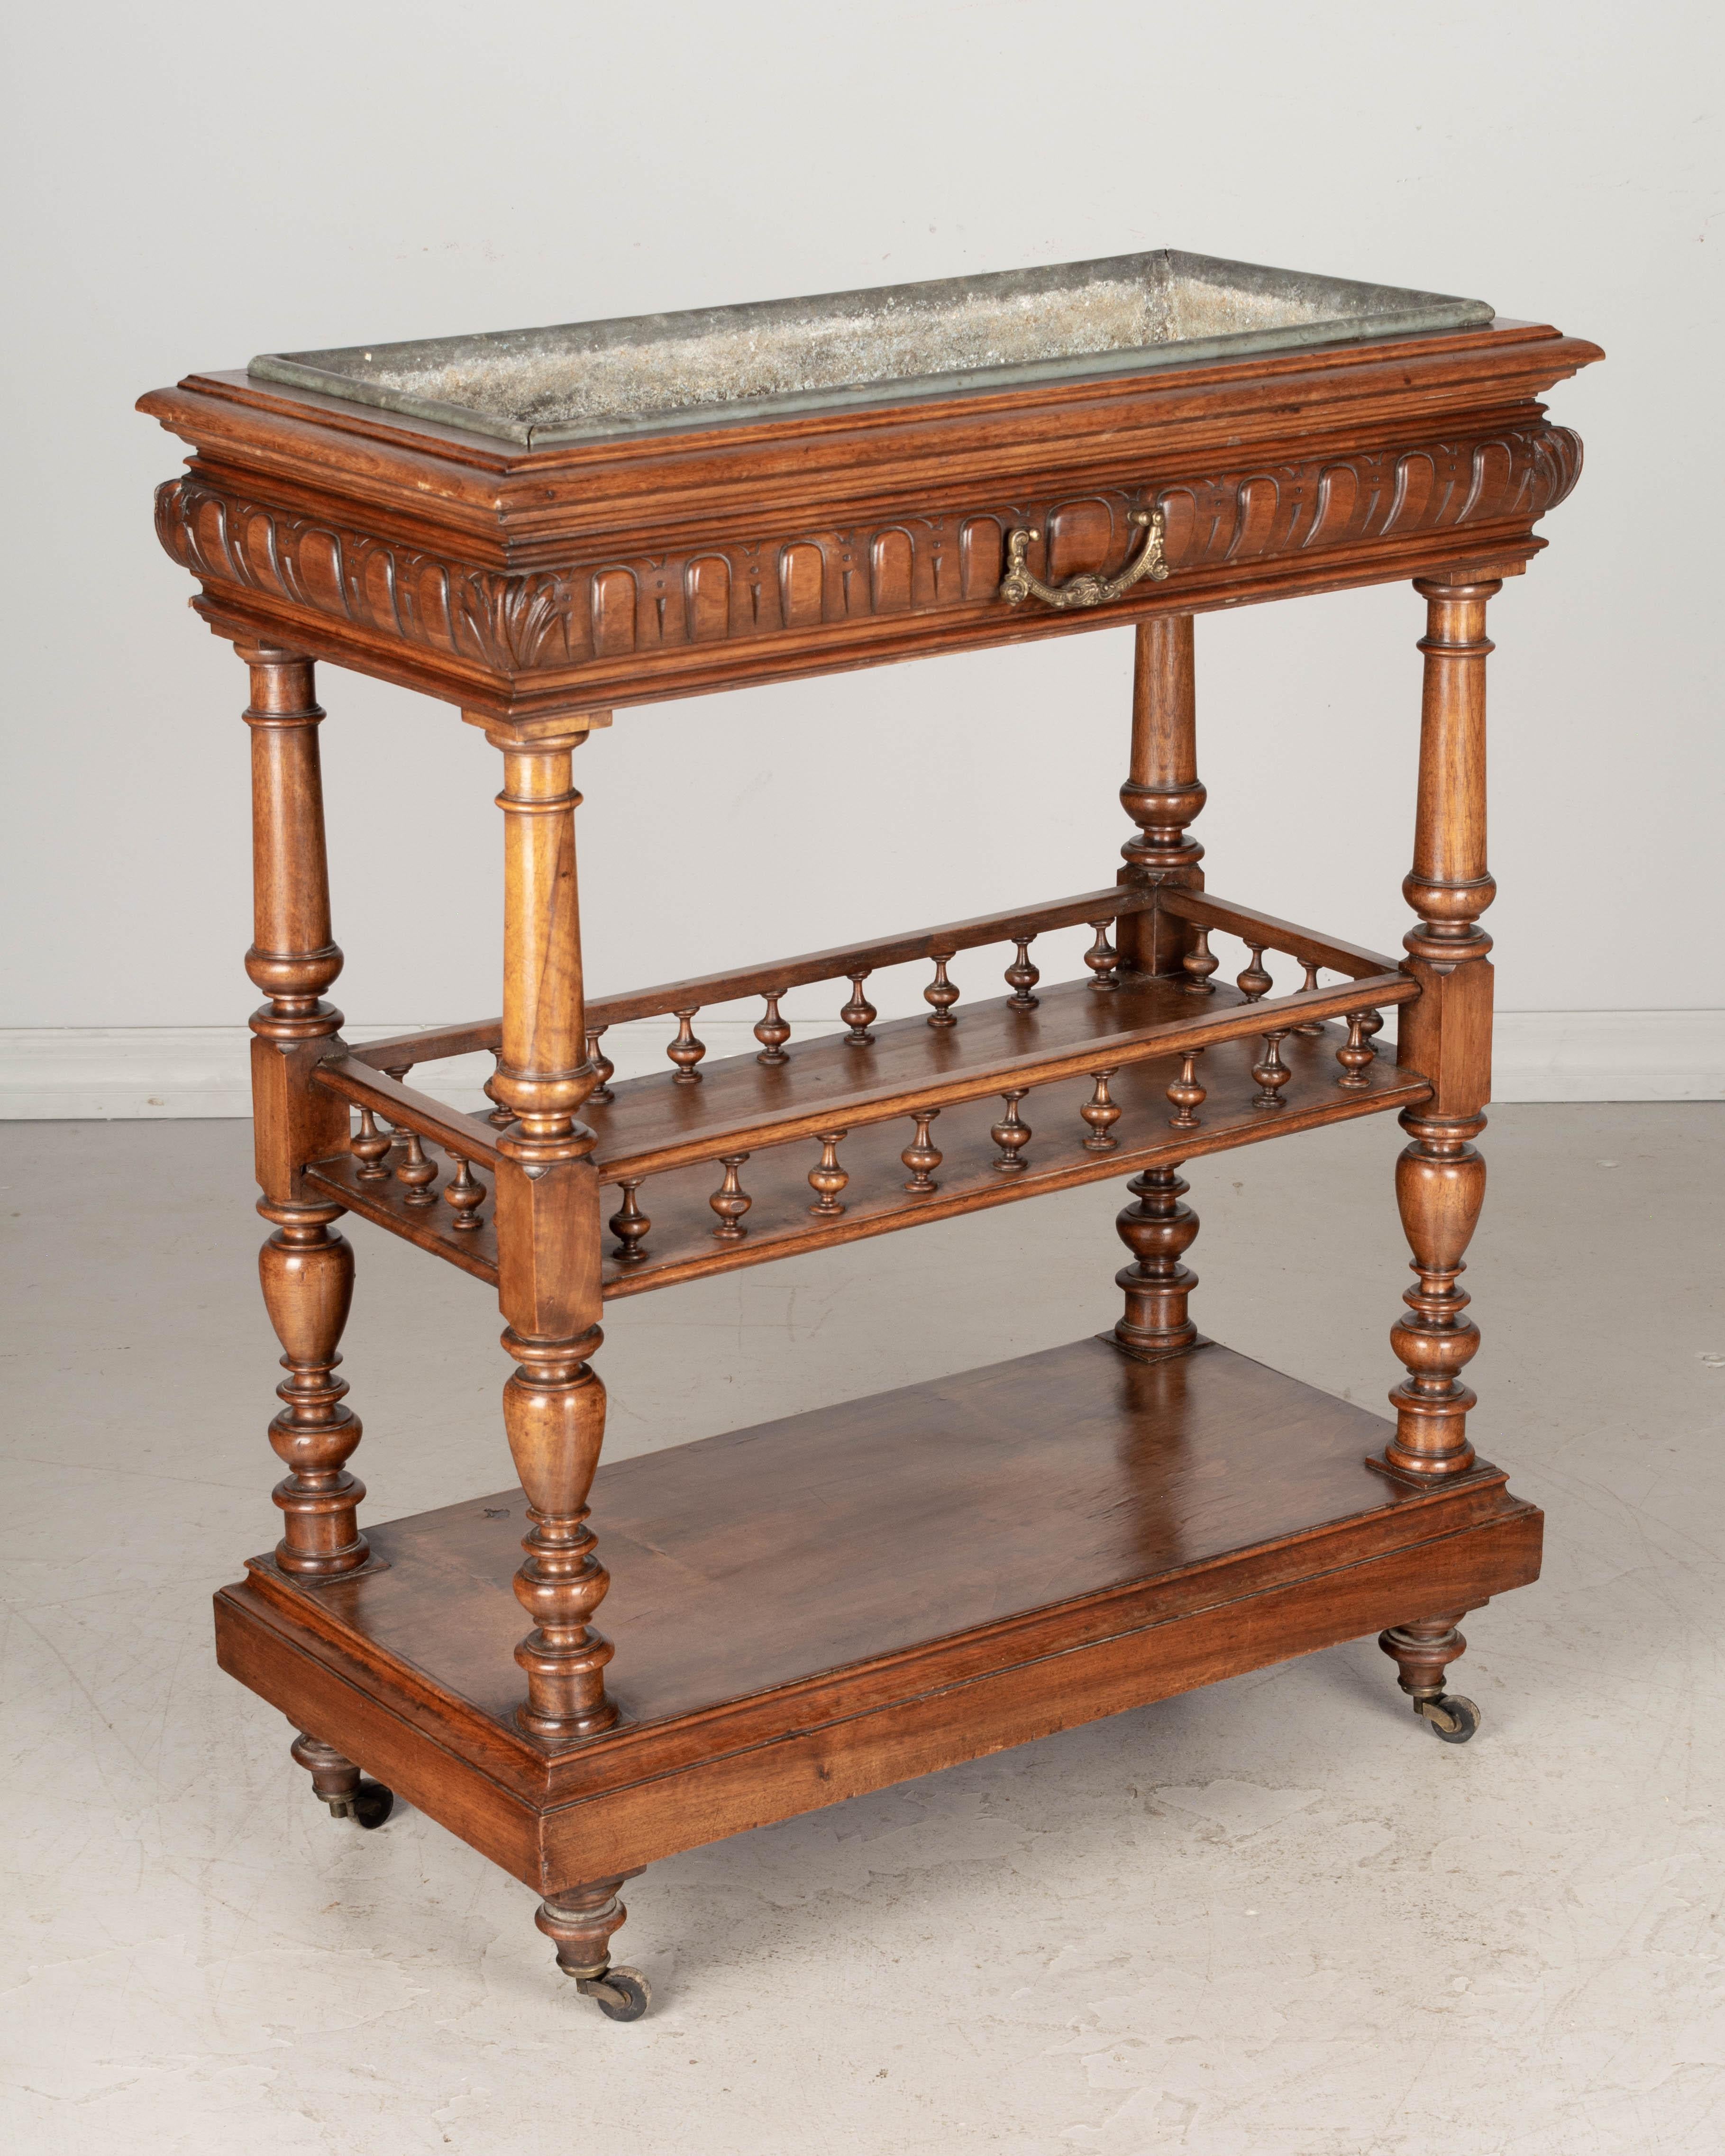 A 19th century French jardinière, or plant stand made of solid and veneer of walnut with removable zinc tray. Middle shelf has a gallery with turned spindles. Castors roll smoothly. Waxed patina. All original. Minor loss of veneer on bottom shelf.